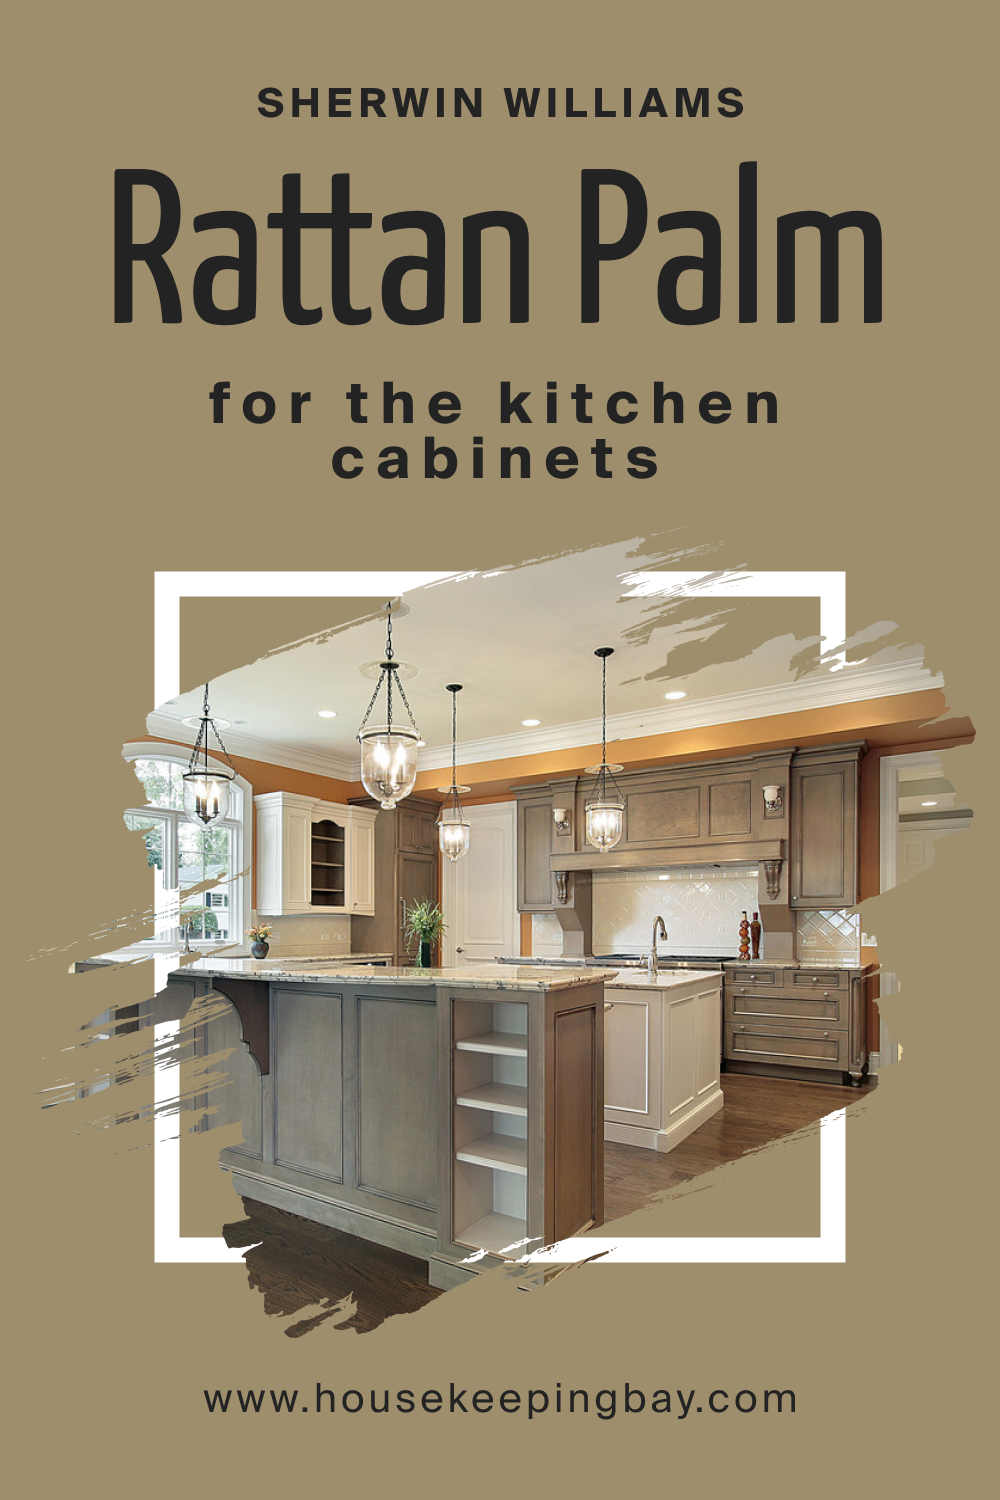 Sherwin Williams. SW 9533 Rattan Palm For the Kitchen Cabinets